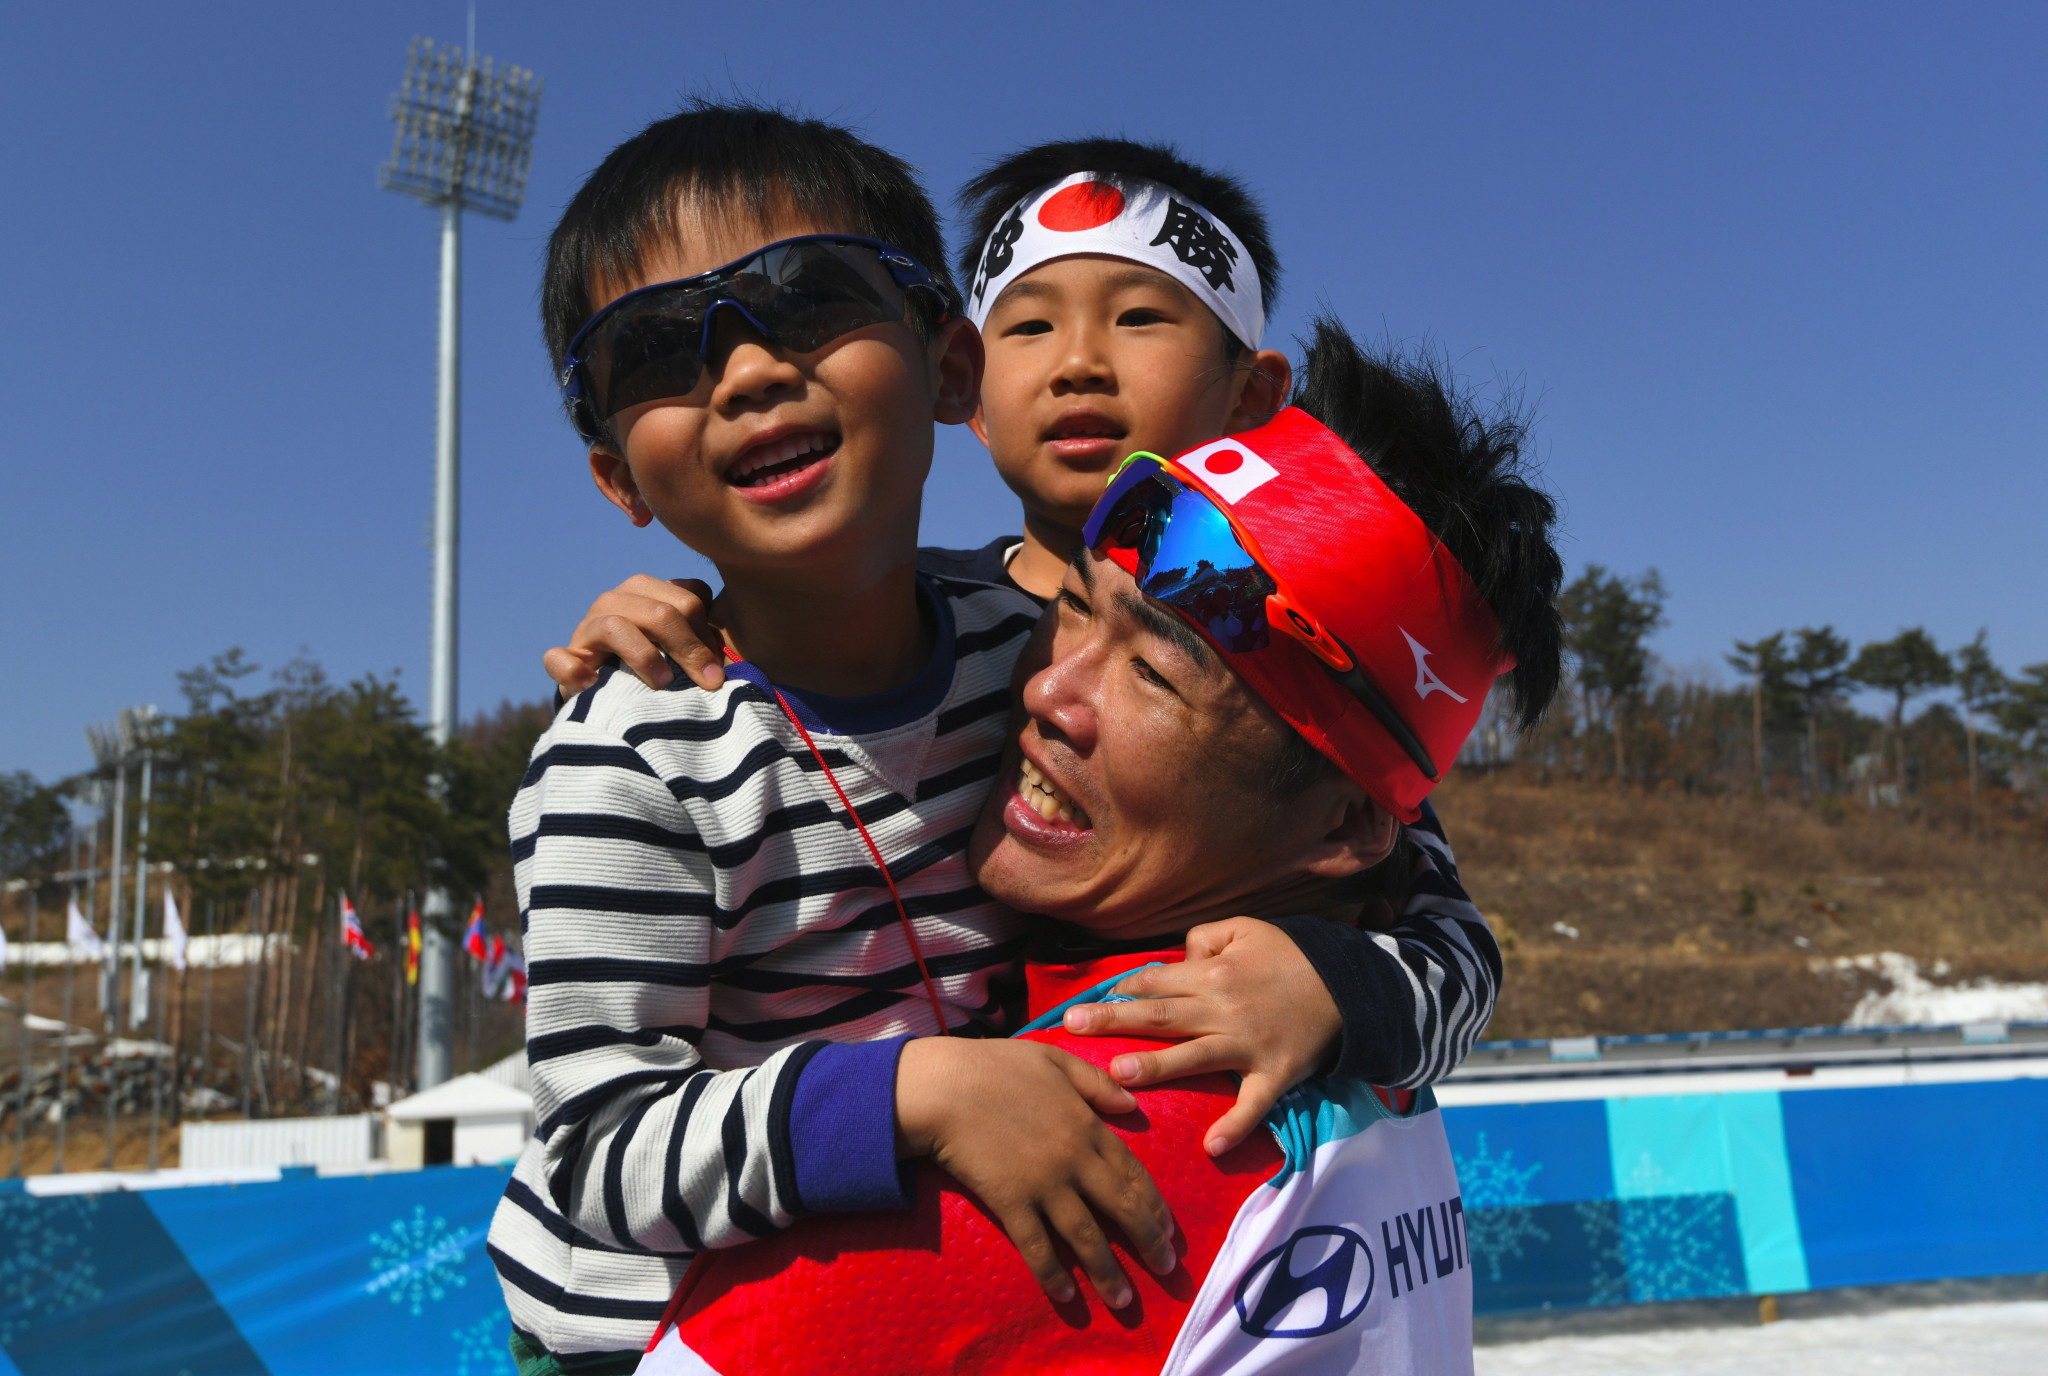 Japan's Yoshihiro Nitta celebrates with his children after winning silver in the men's 1.5km standing cross-country skiing competition ©Getty Images